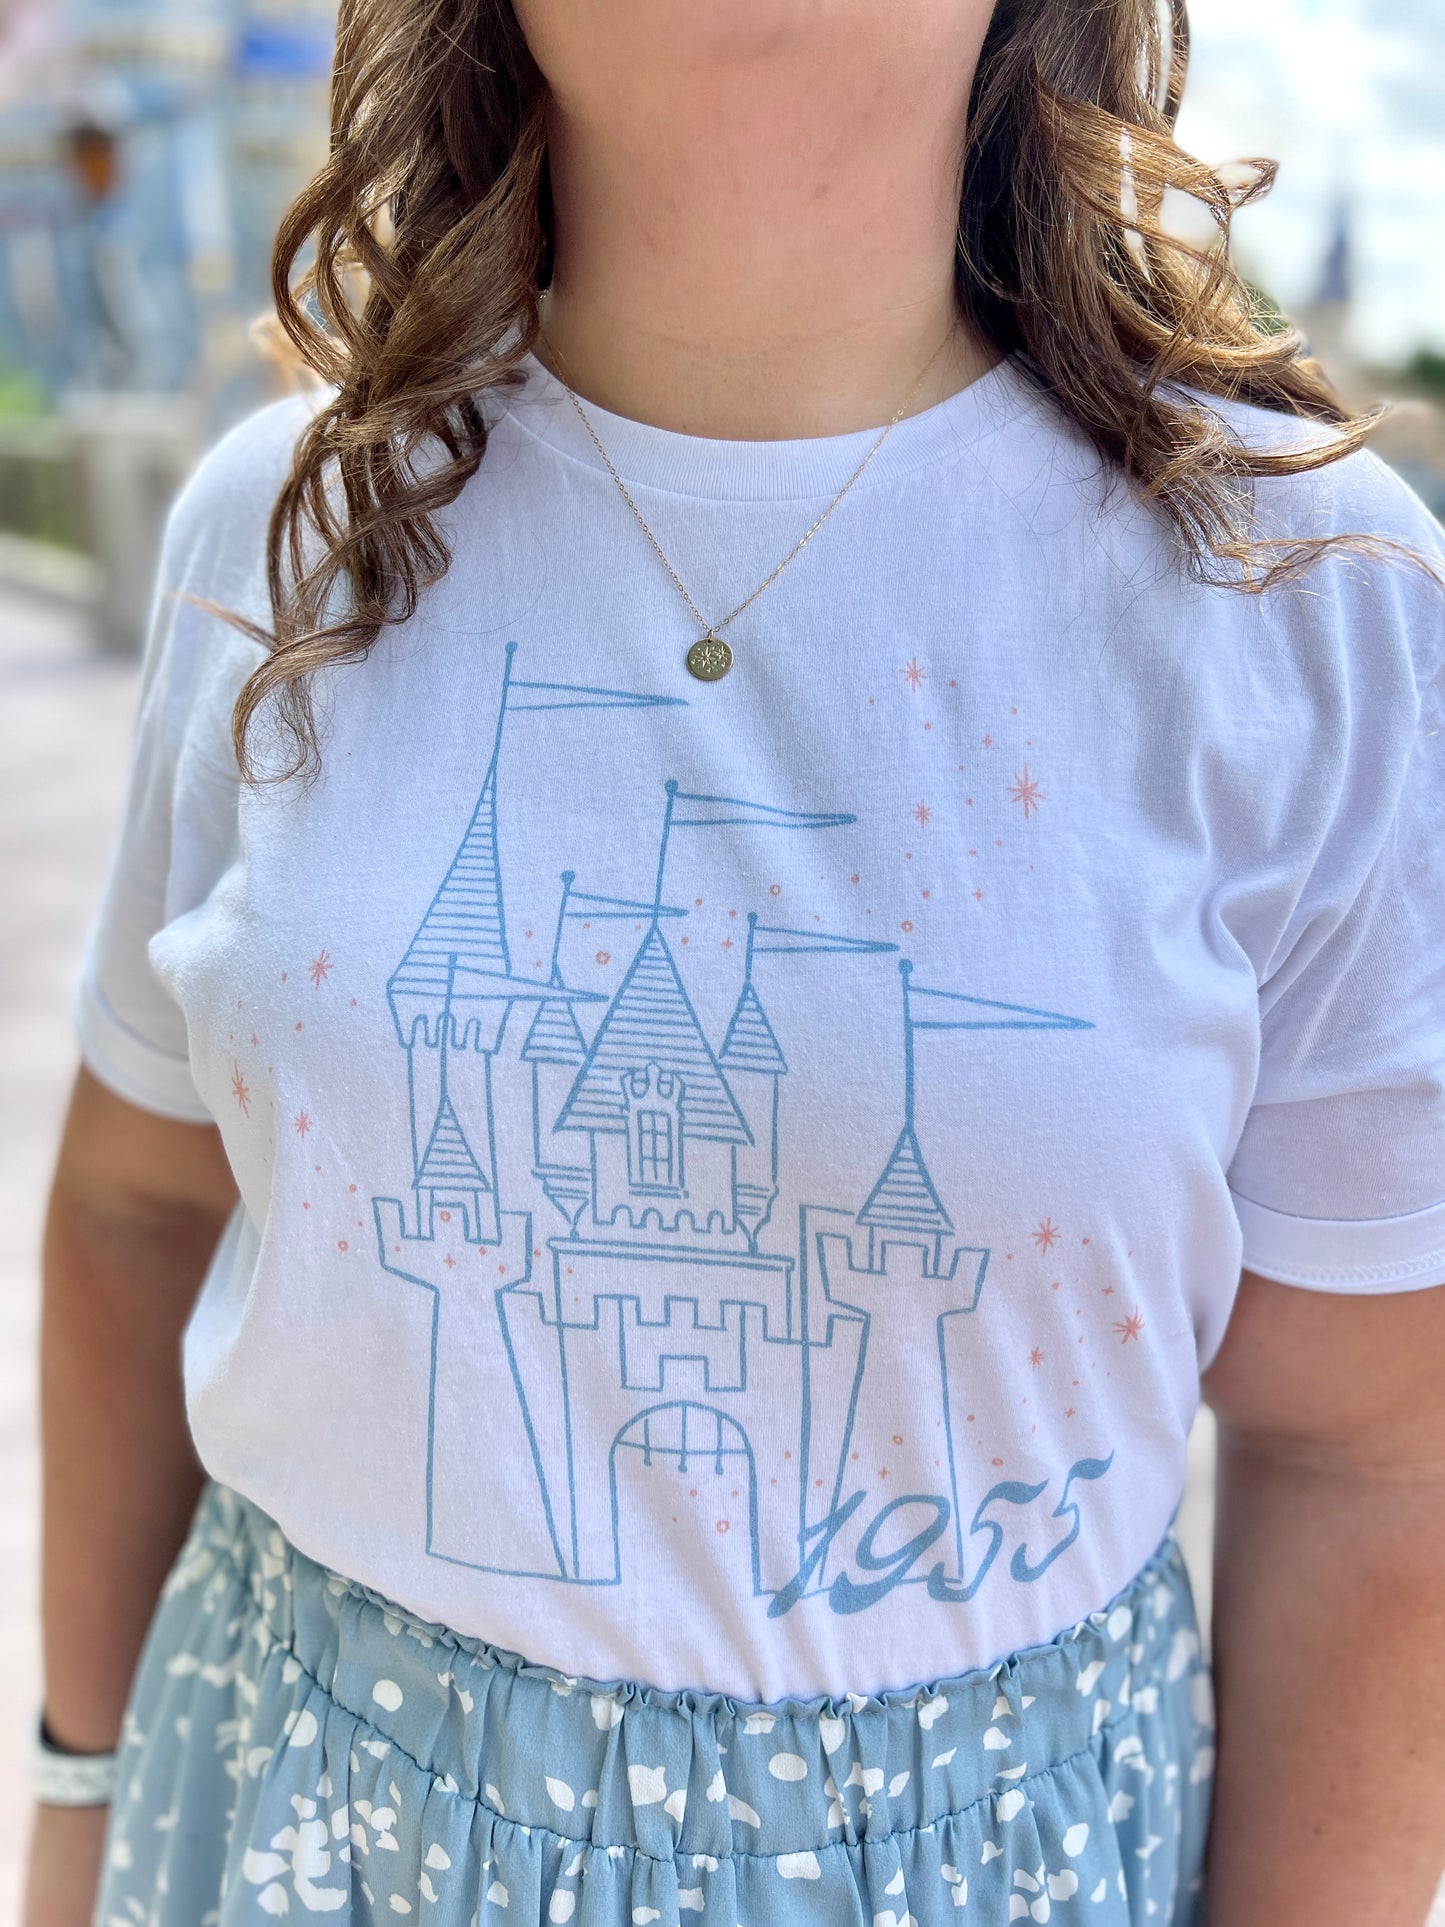 Woman  wearing a blue skirt and white t-shirt. The shirt is printed with vintage style sketch of a castle with the year 1955 and pixie dust above the castle.